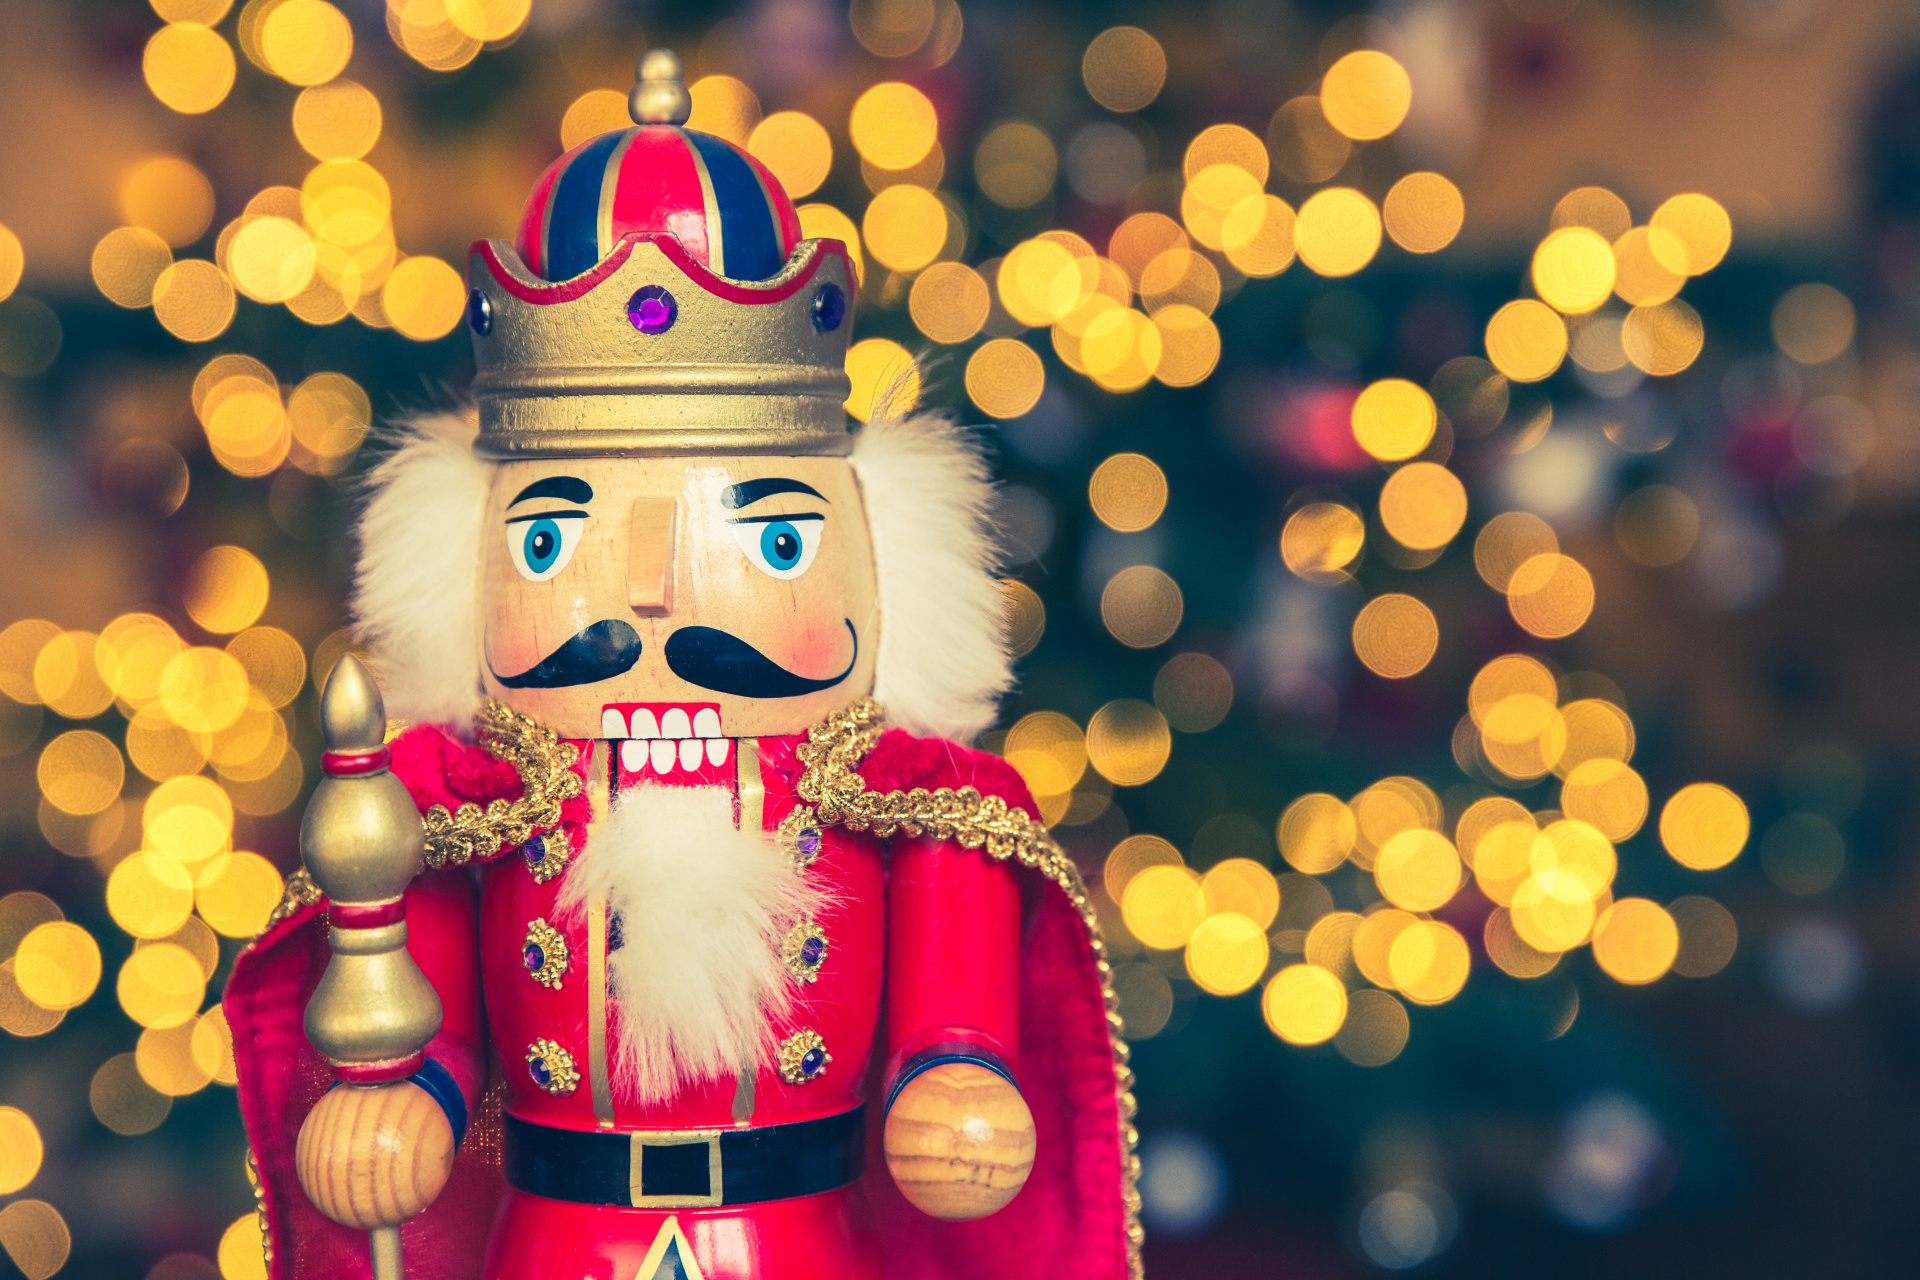 Vintage Christmas nutcracker soldier with blurred Christmas tree in the background